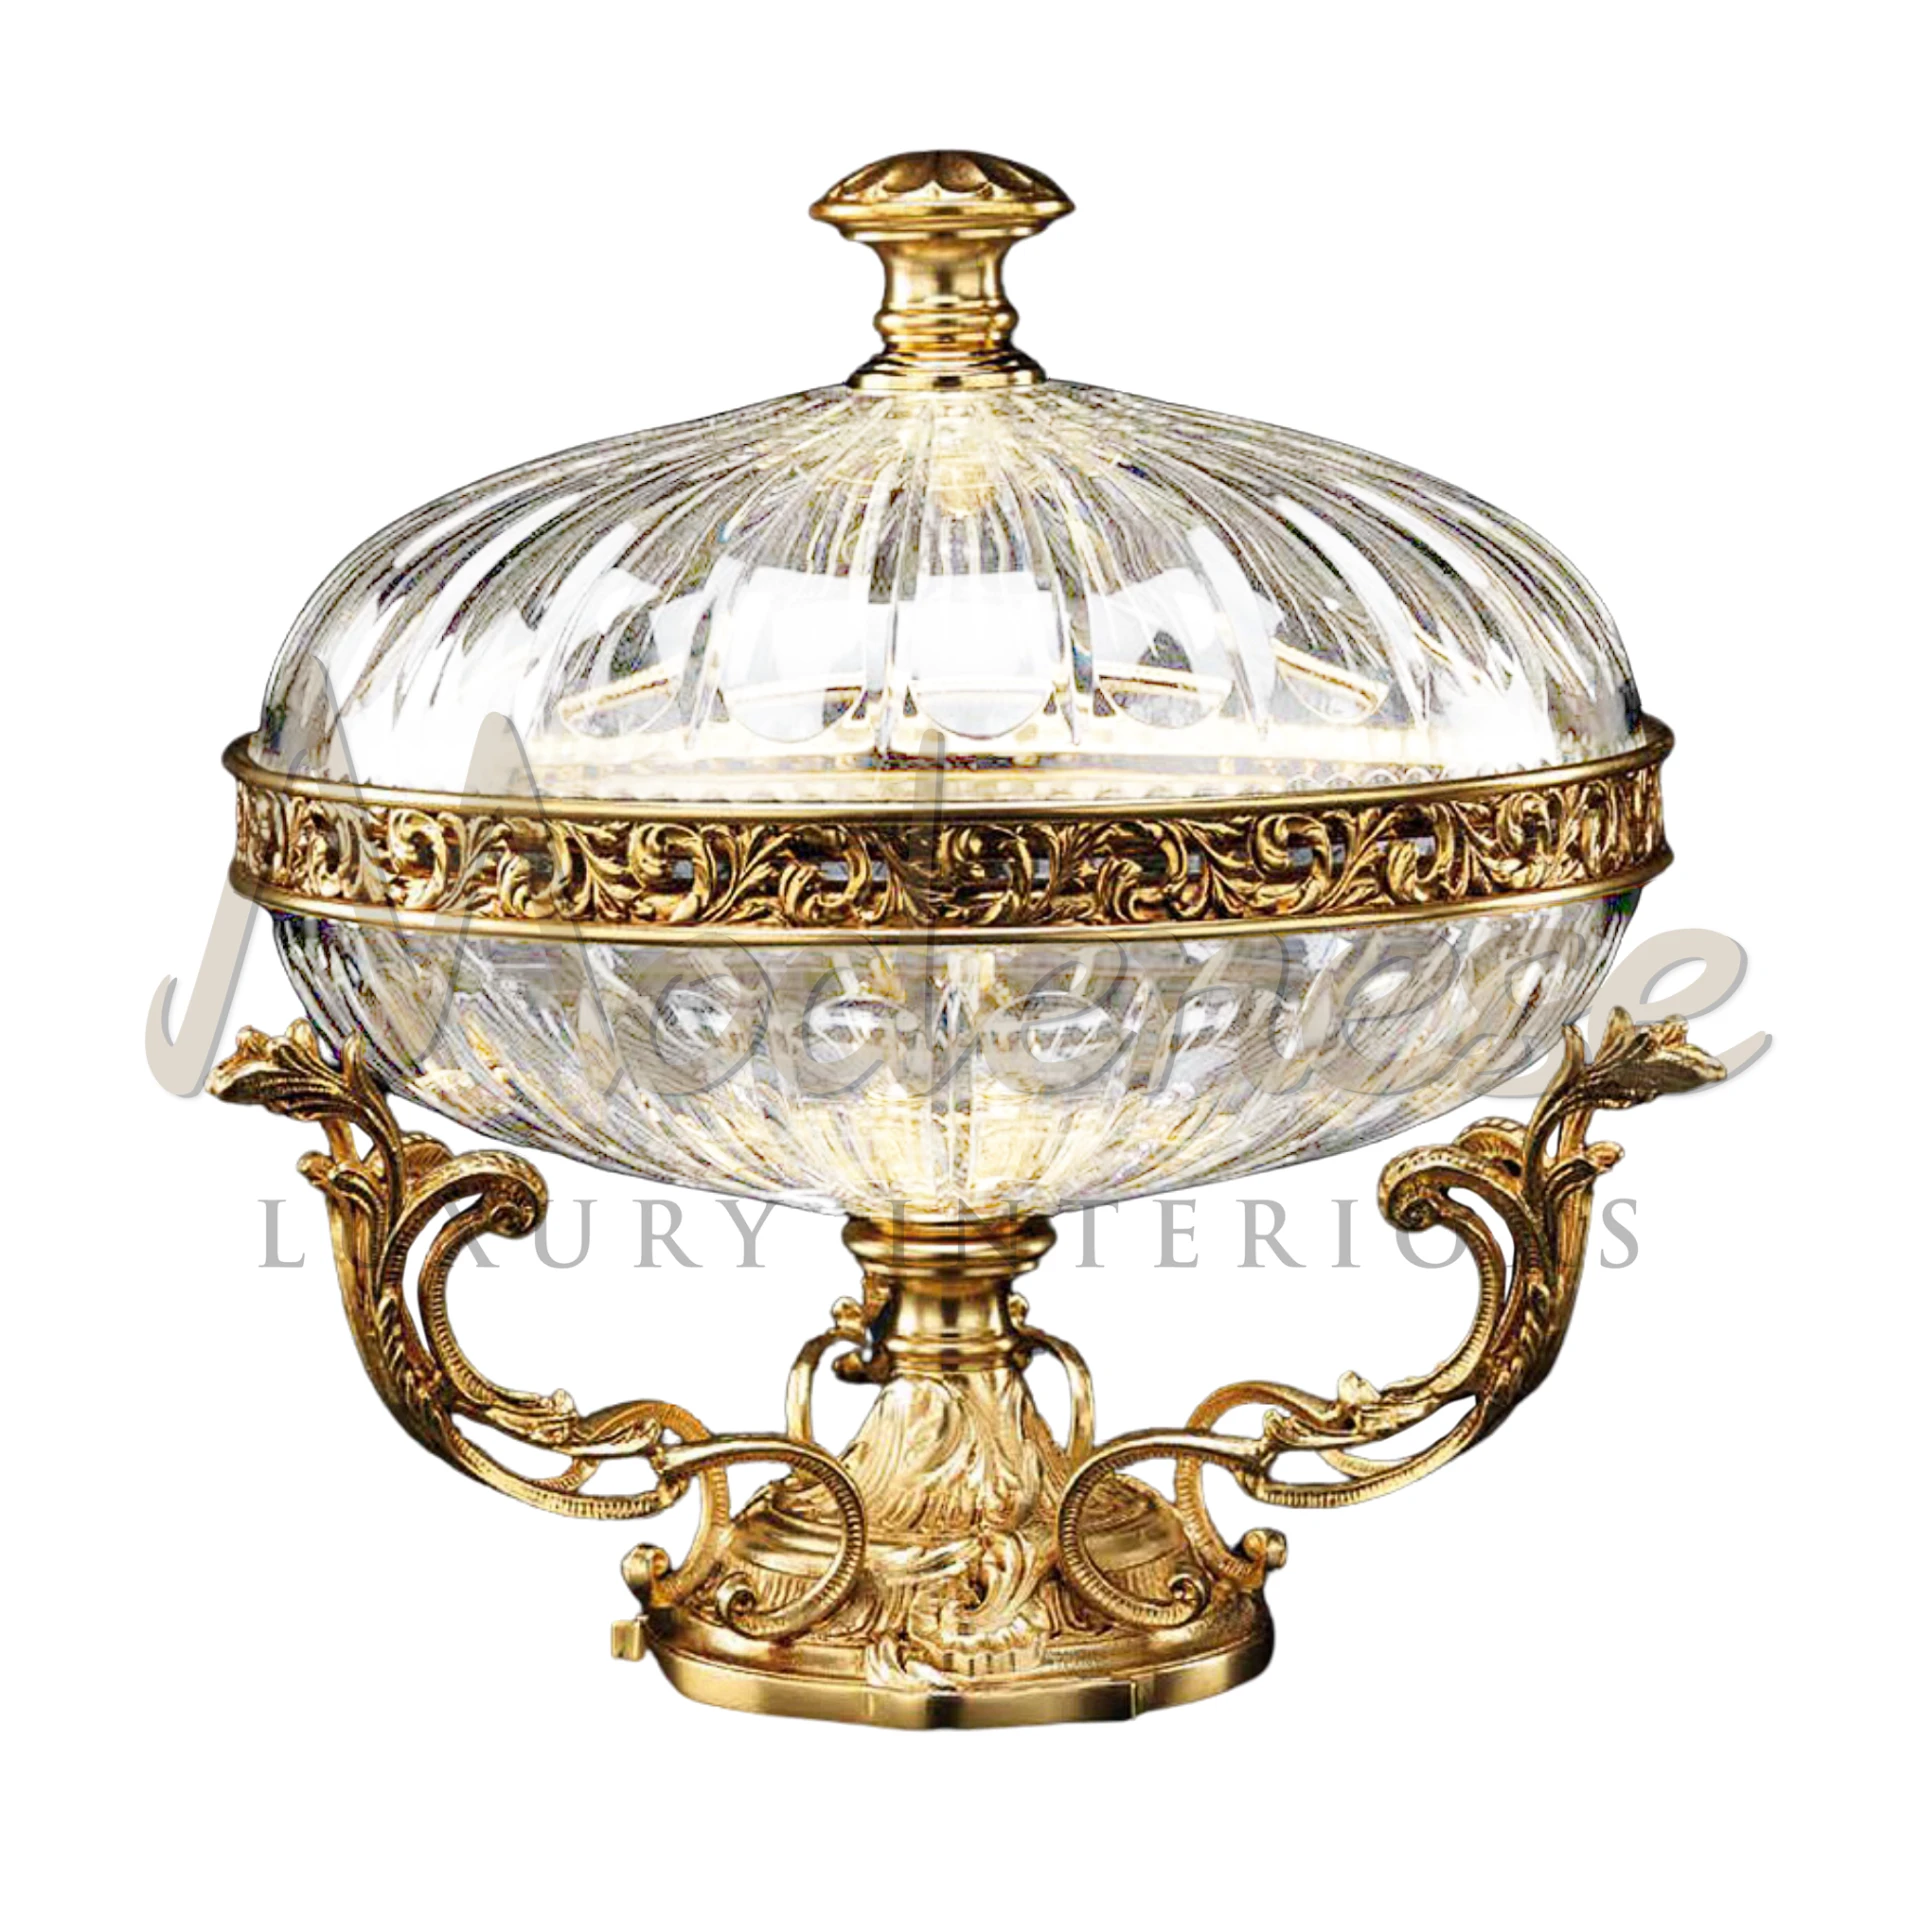 Modenese Luxury Glass Closed Box, a sophisticated and functional piece for enhancing luxury interior design.